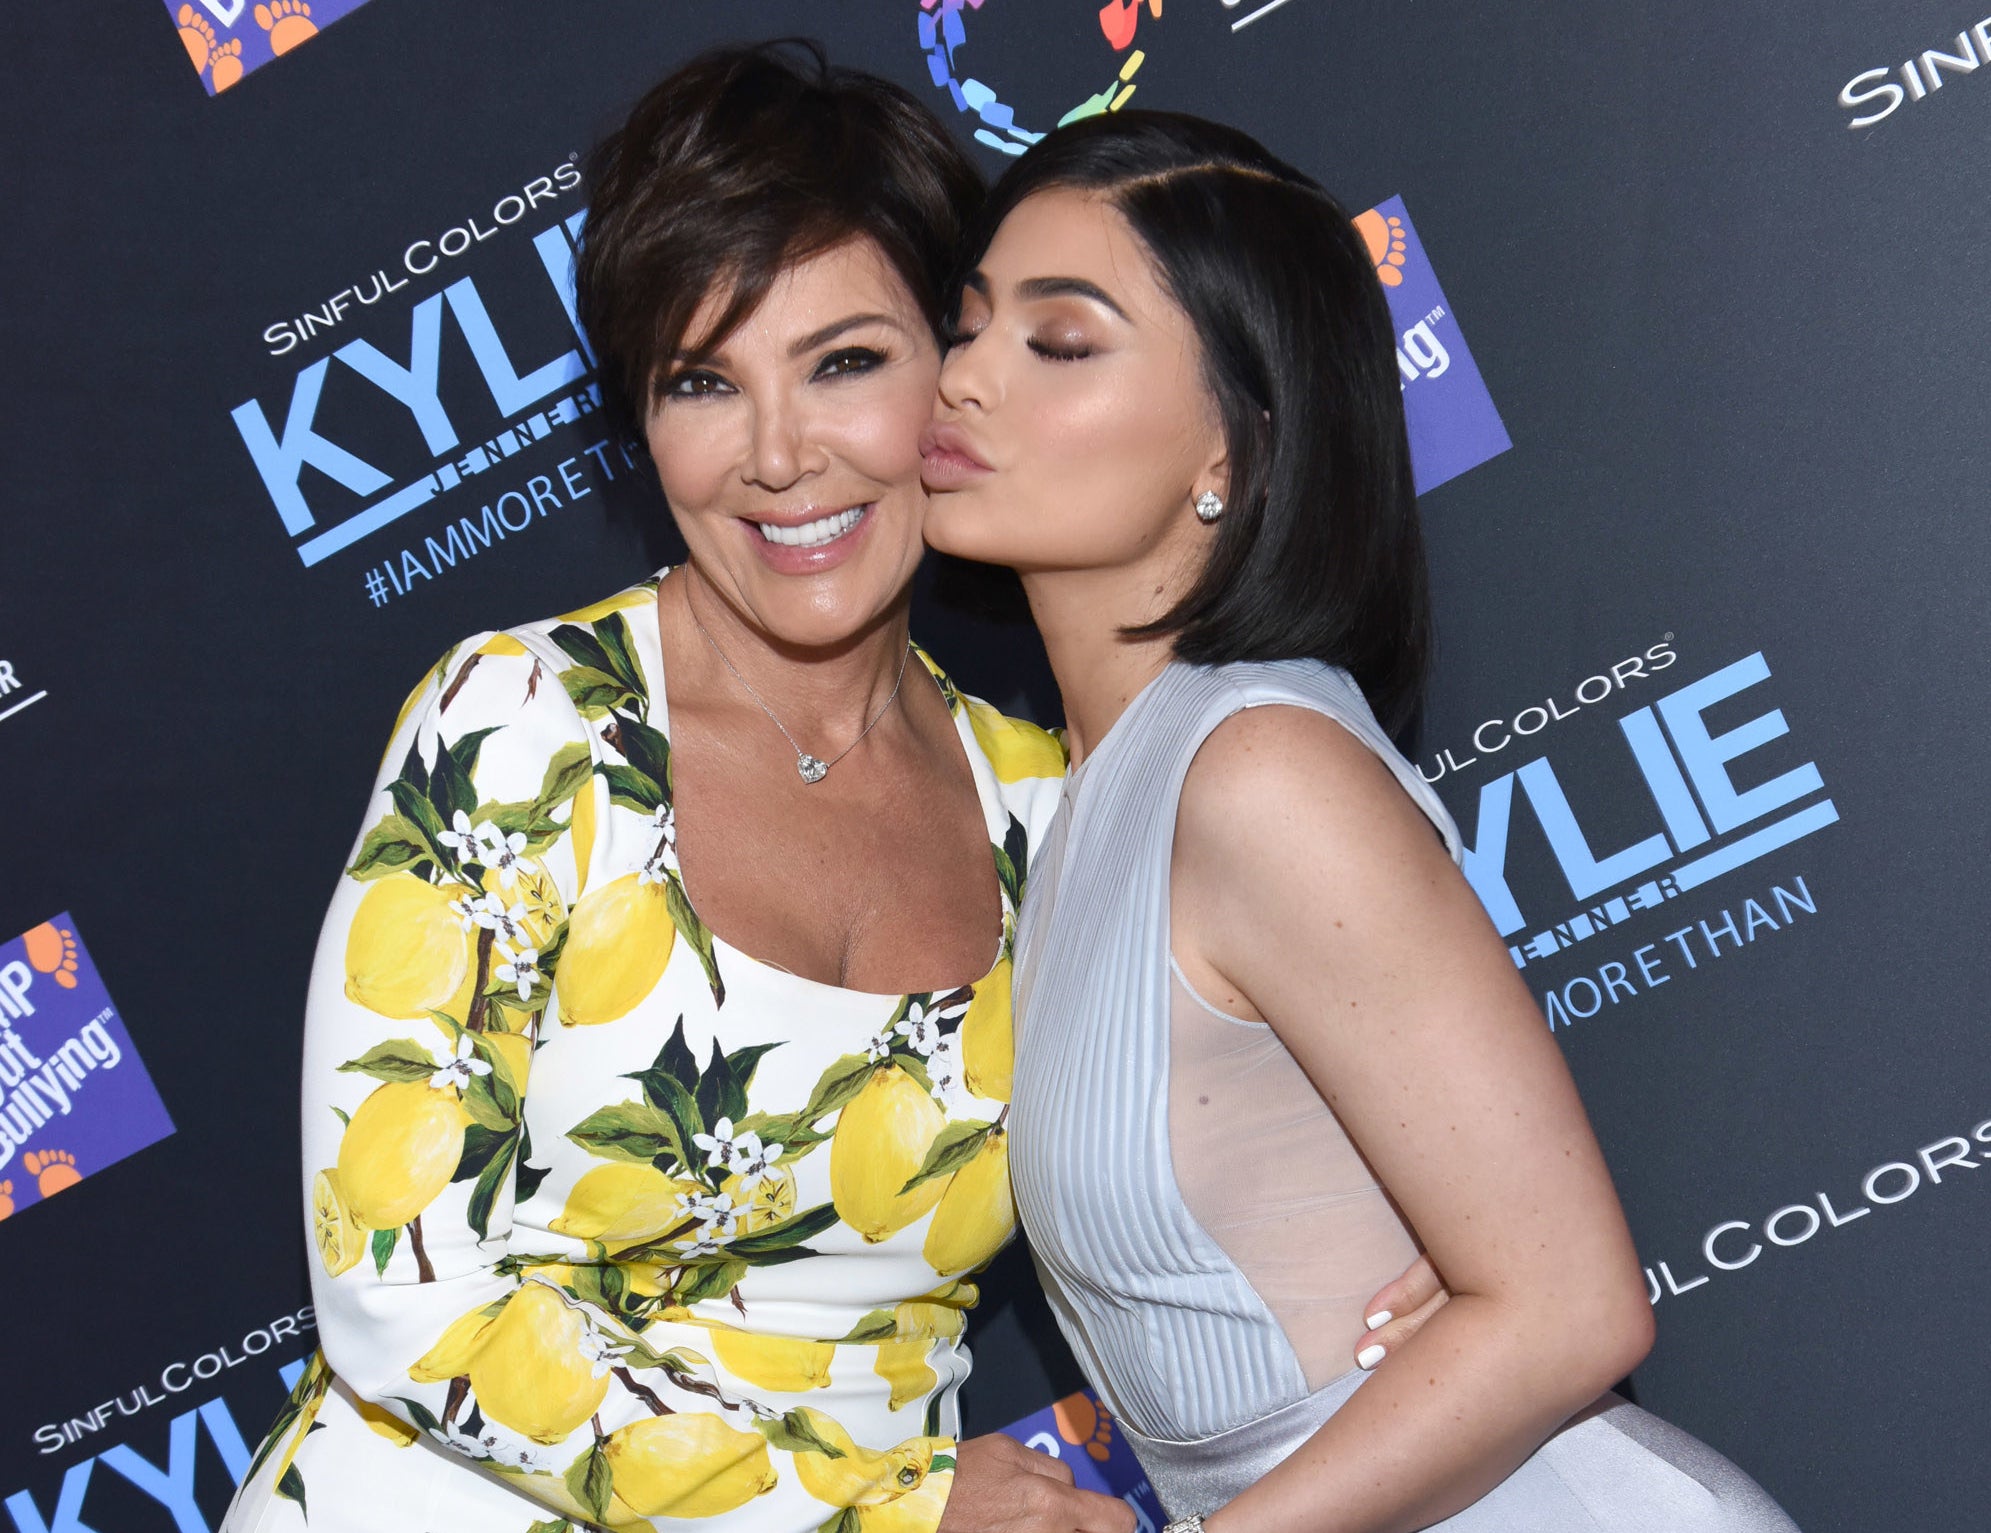 Kylie poses with her mom Kris